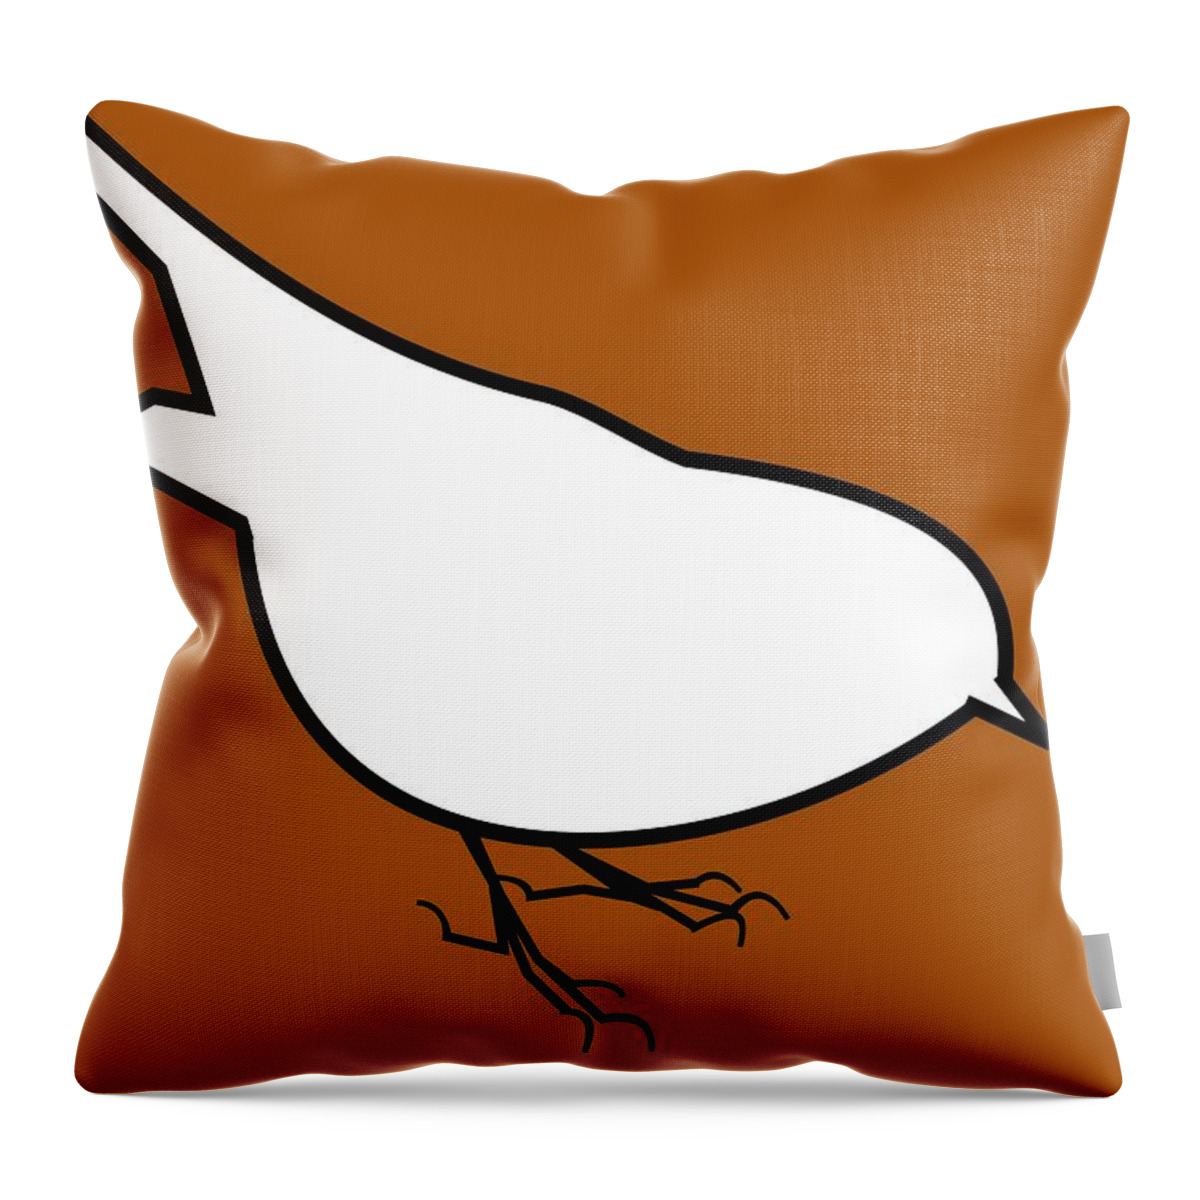 Sparrow Throw Pillow featuring the digital art Hedge sparrow by Fatline Graphic Art